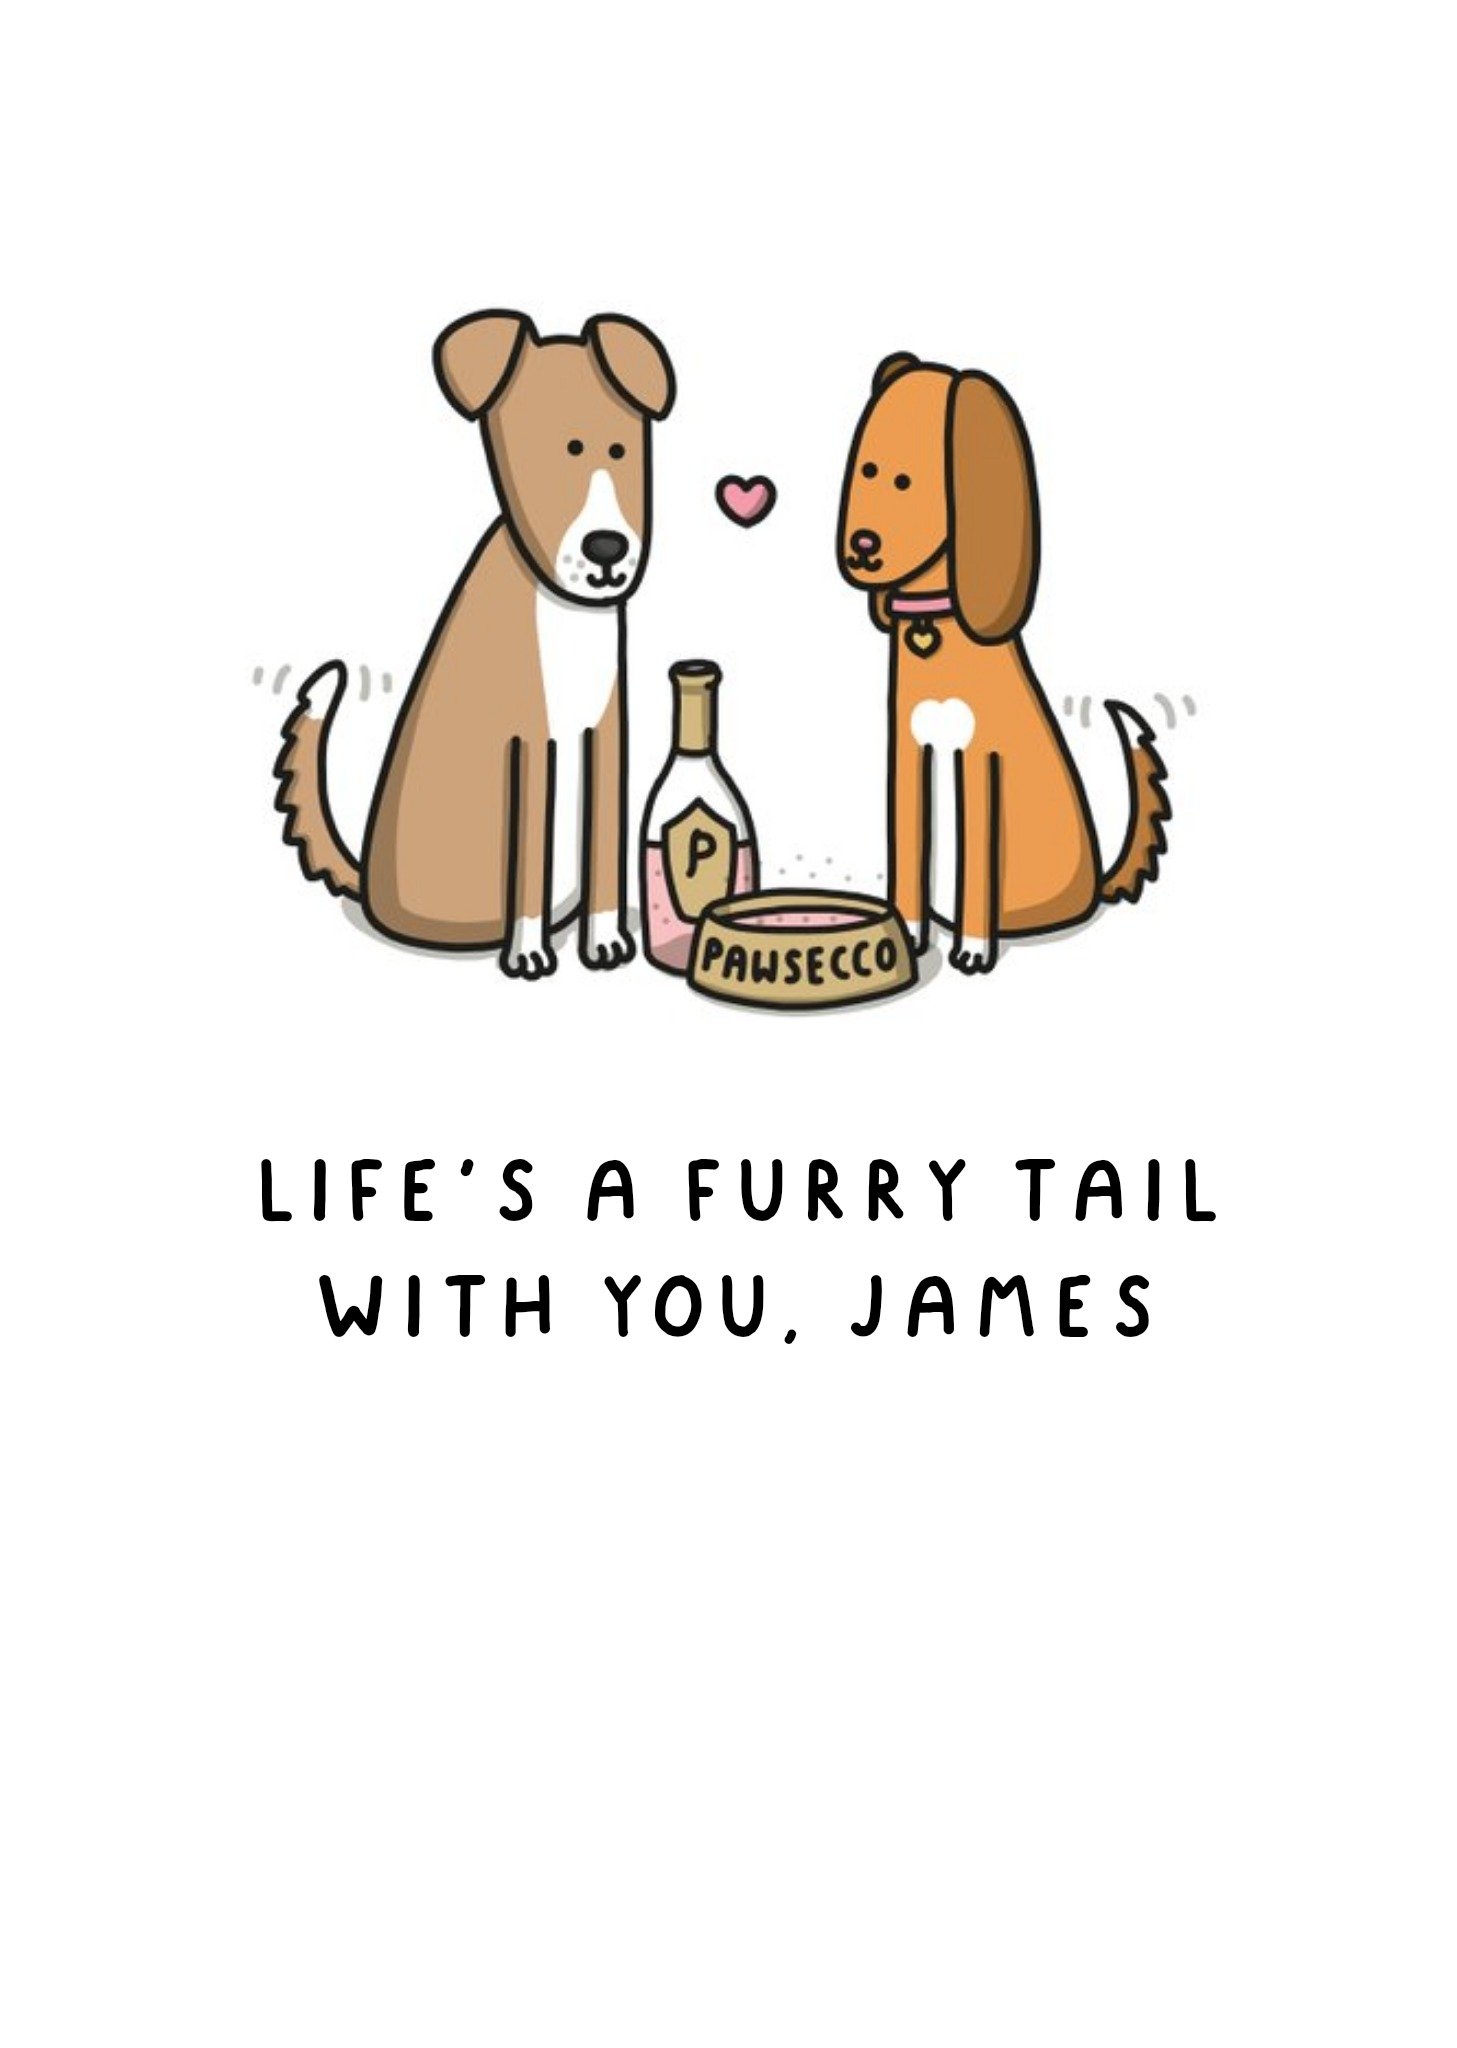 Love Hearts Rich T Mungo And Shoddy Illustrated Dogs Cute Valentine's Card, Large